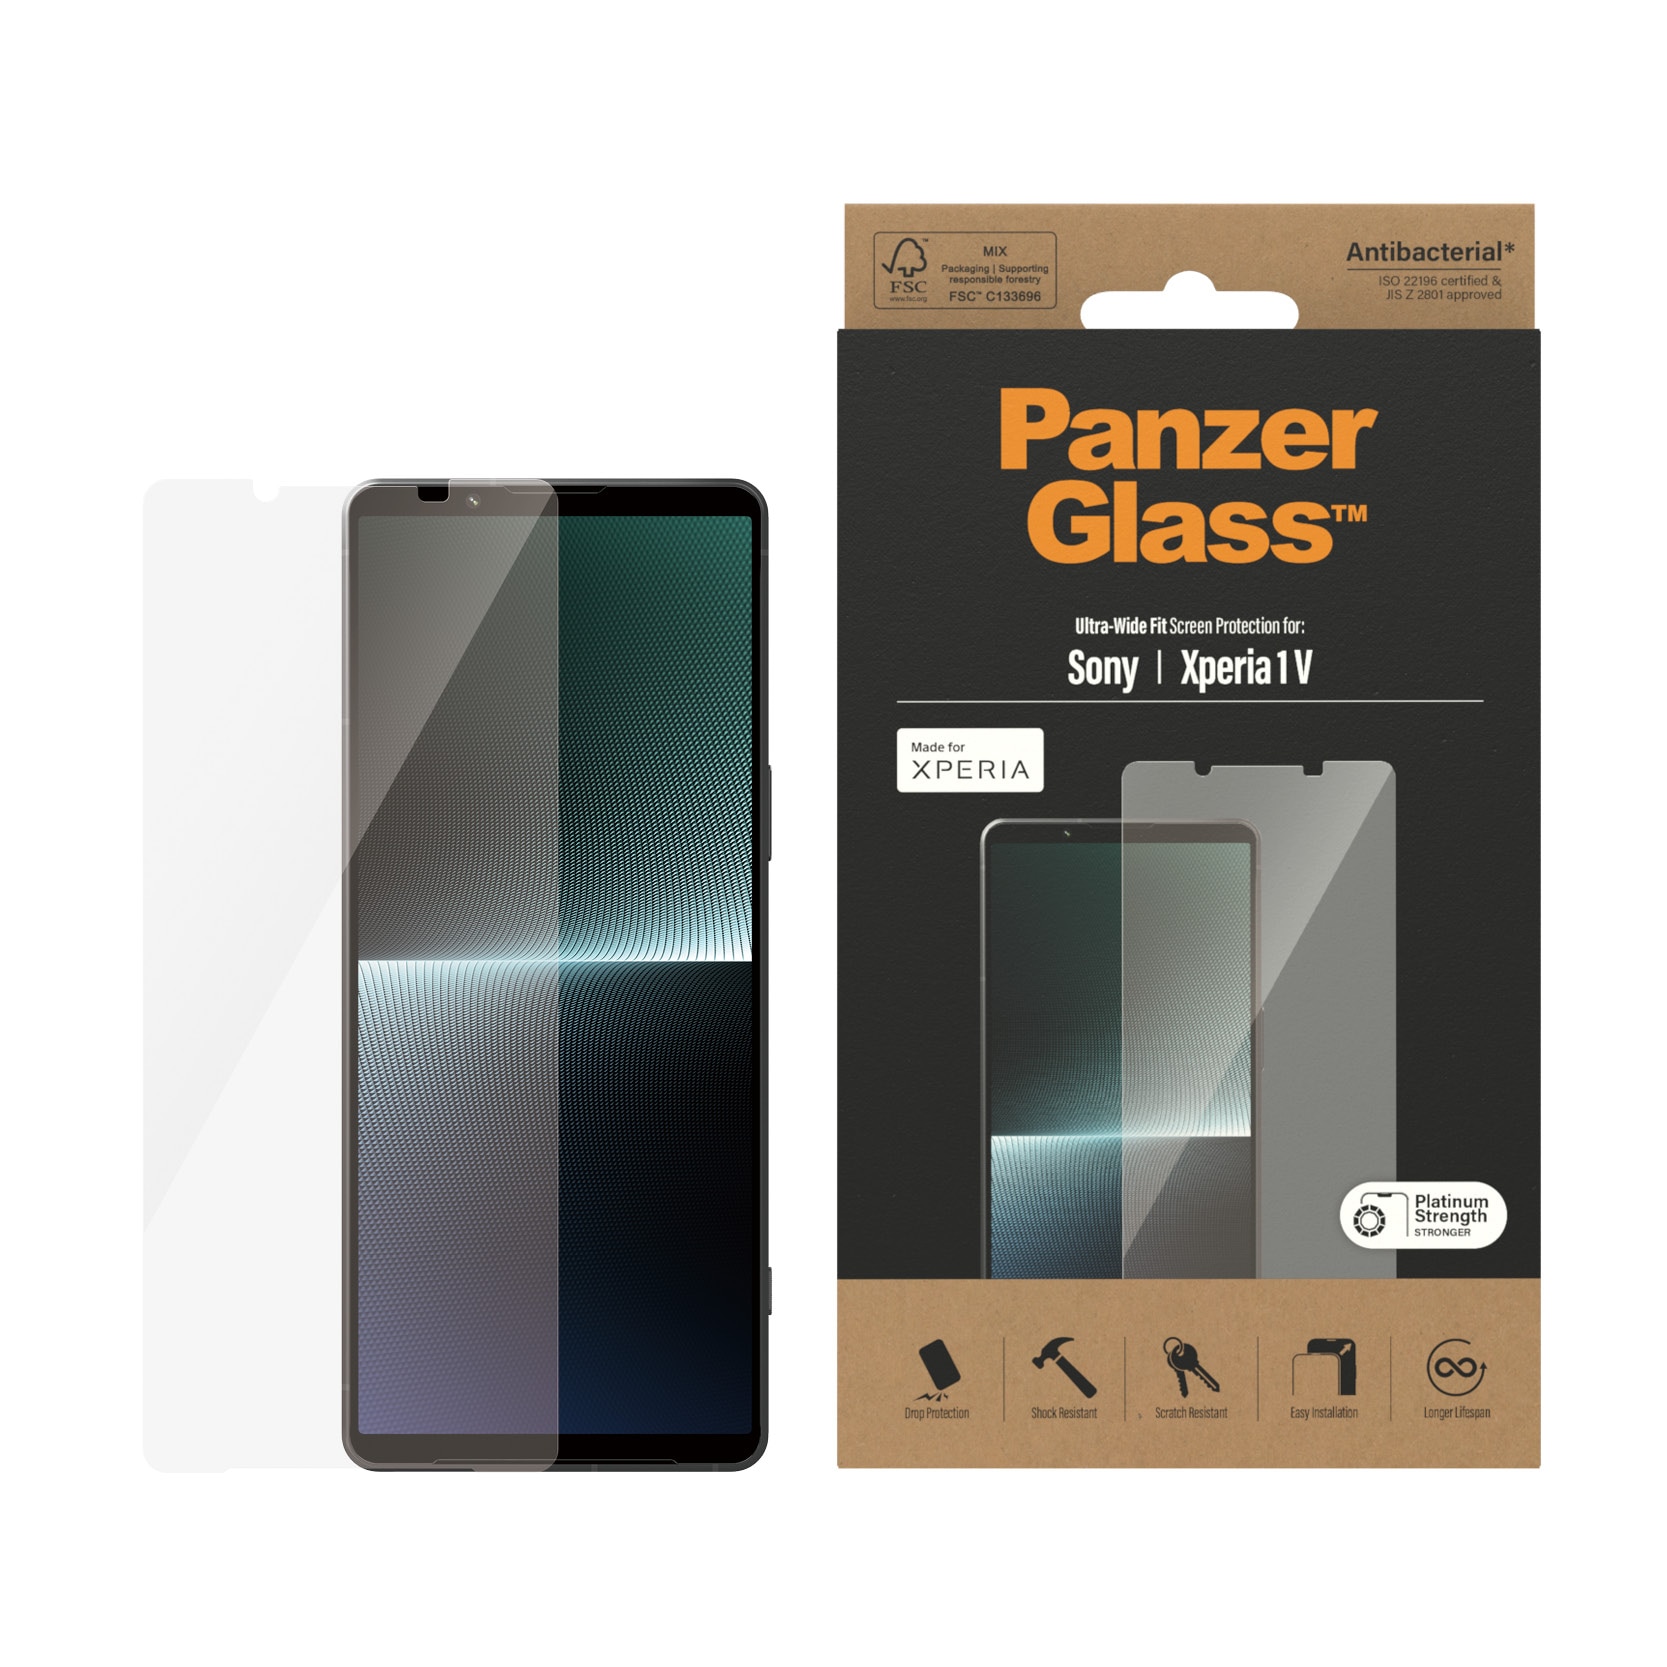 Sony Xperia 1 V Screen Protector Ultra Wide Fit